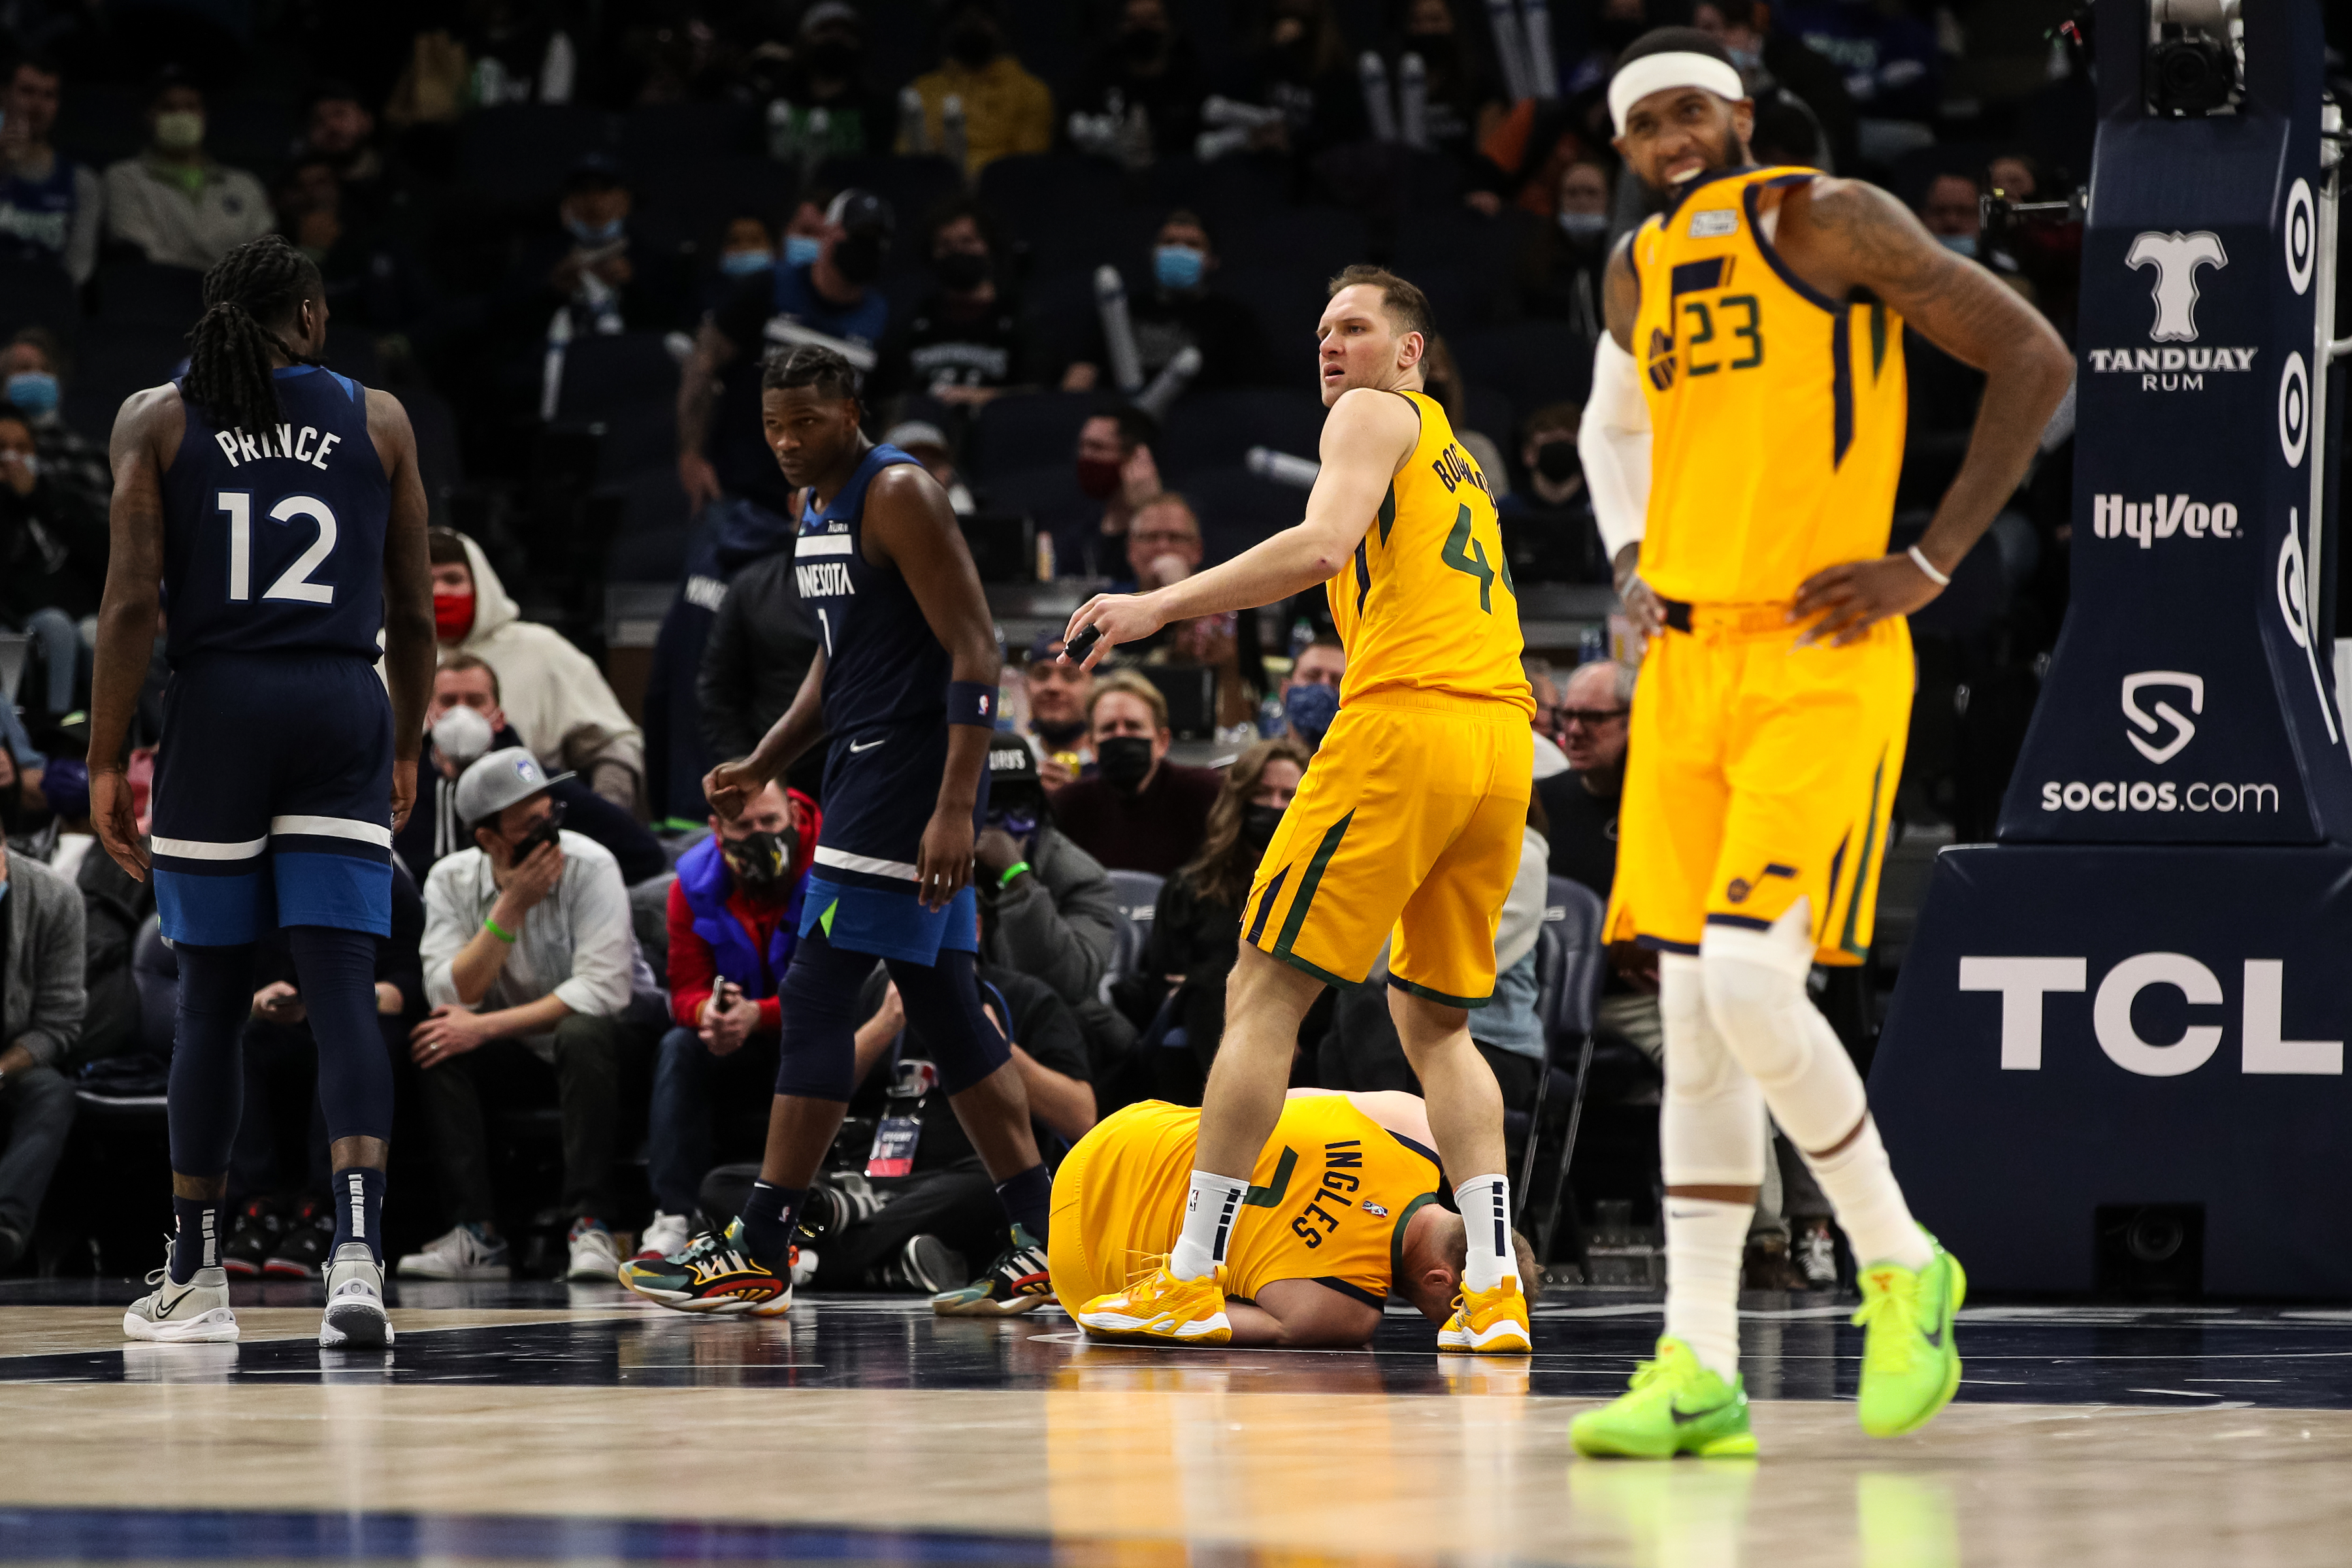 Utah Jazz forward Joe Ingles lies on the floor after suffering a knee injury during an NBA game against the Minnesota TImberwolves